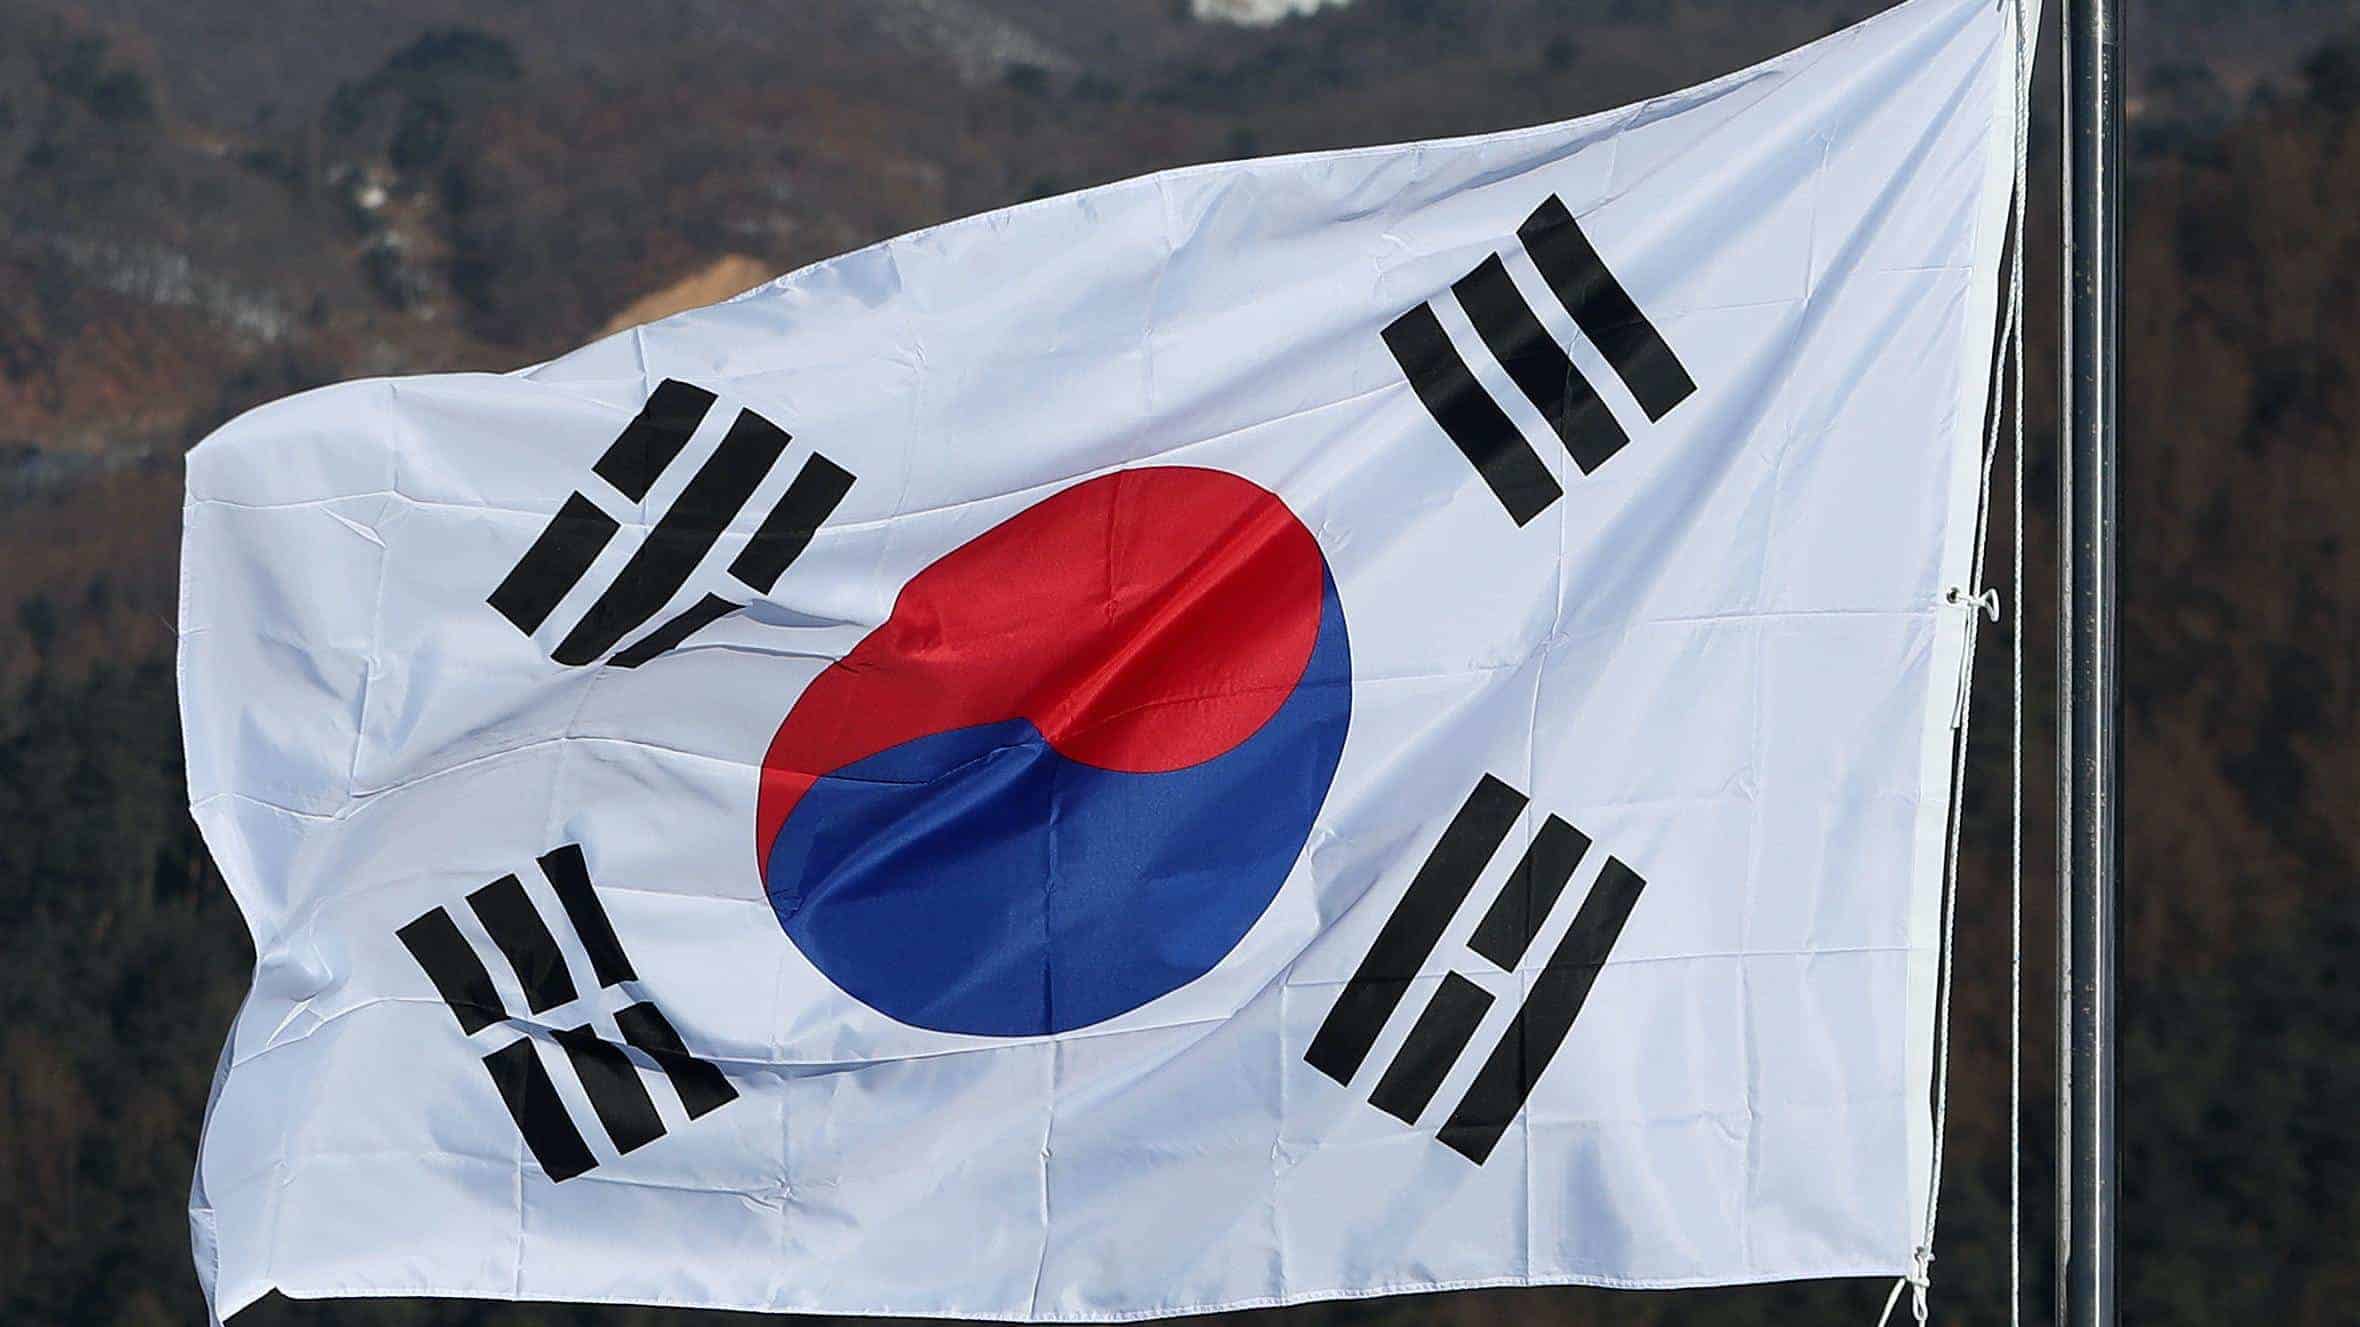 South Korea sentences man to 4 months in prison after breaking lockdown rules